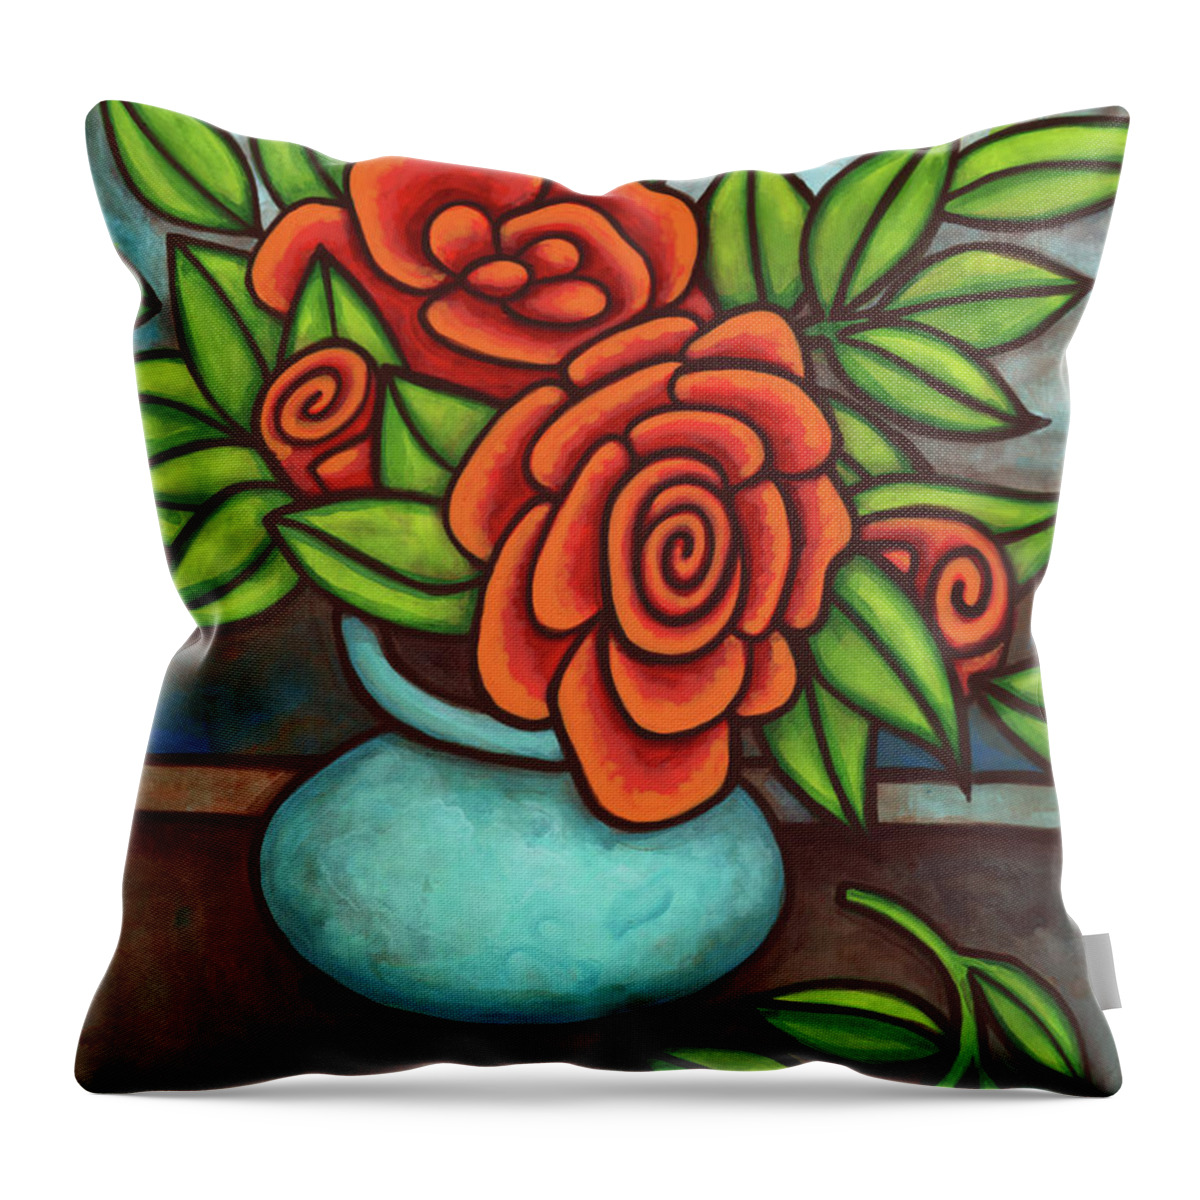 Vase Of Flowers Throw Pillow featuring the painting Floravased 24 by Amy E Fraser